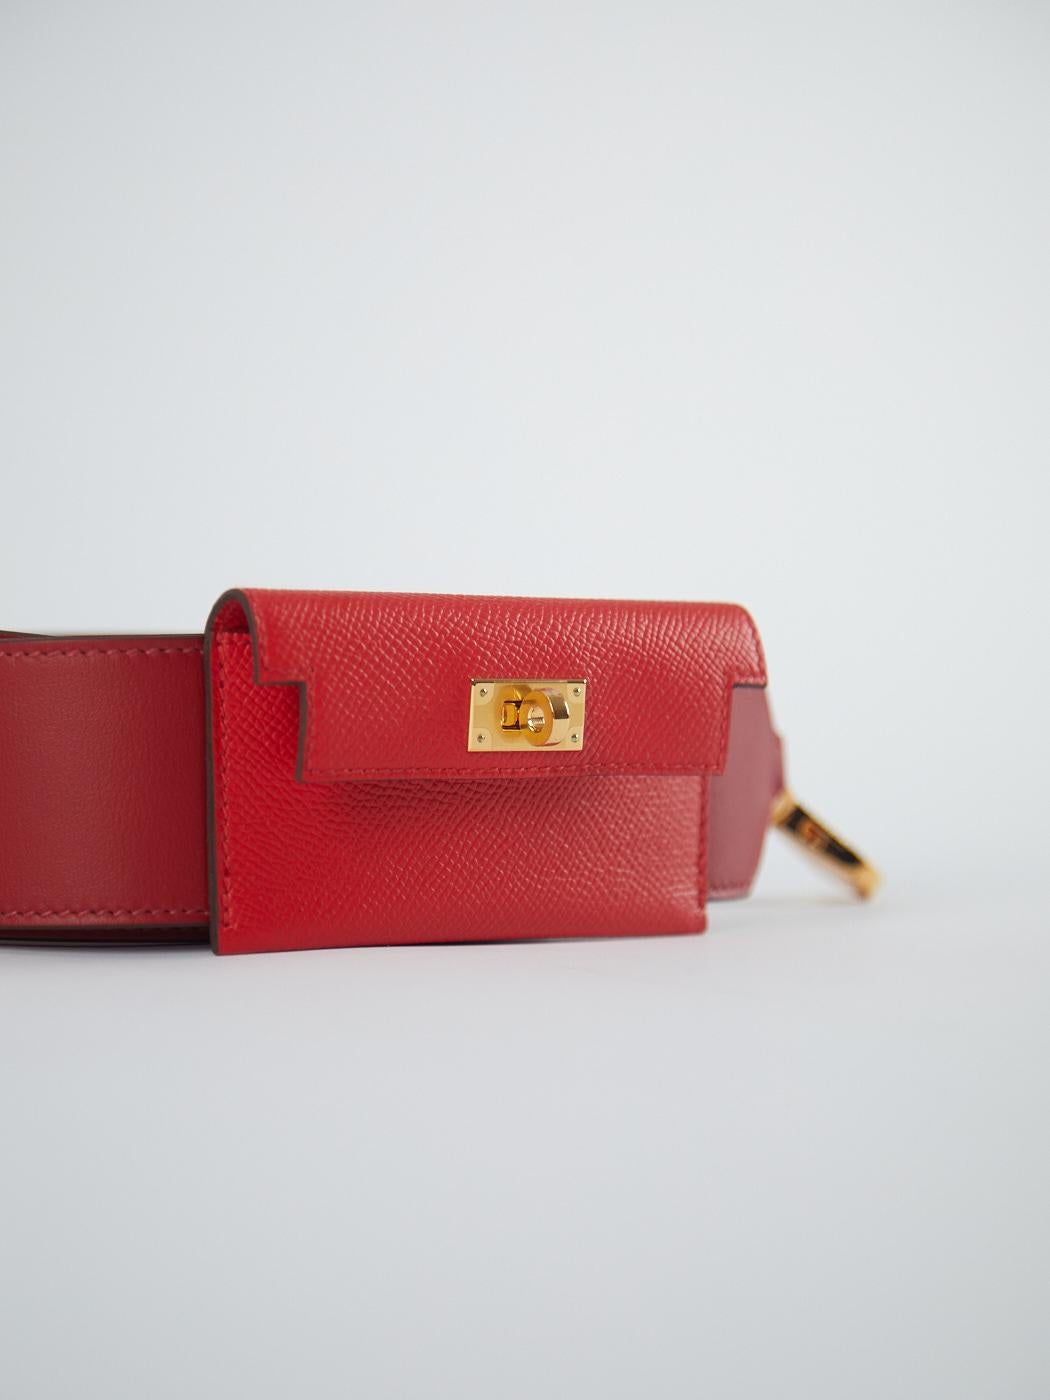 Hermès Kelly Pocket Strap 105cm in Rouge Casaque & Tomate

Epsom and Swift Leather With Gold Hardware

Y Stamp / No Receipt 

The 105cm is the longest length strap and enables most people to wear the bag crossbody, as well as on the